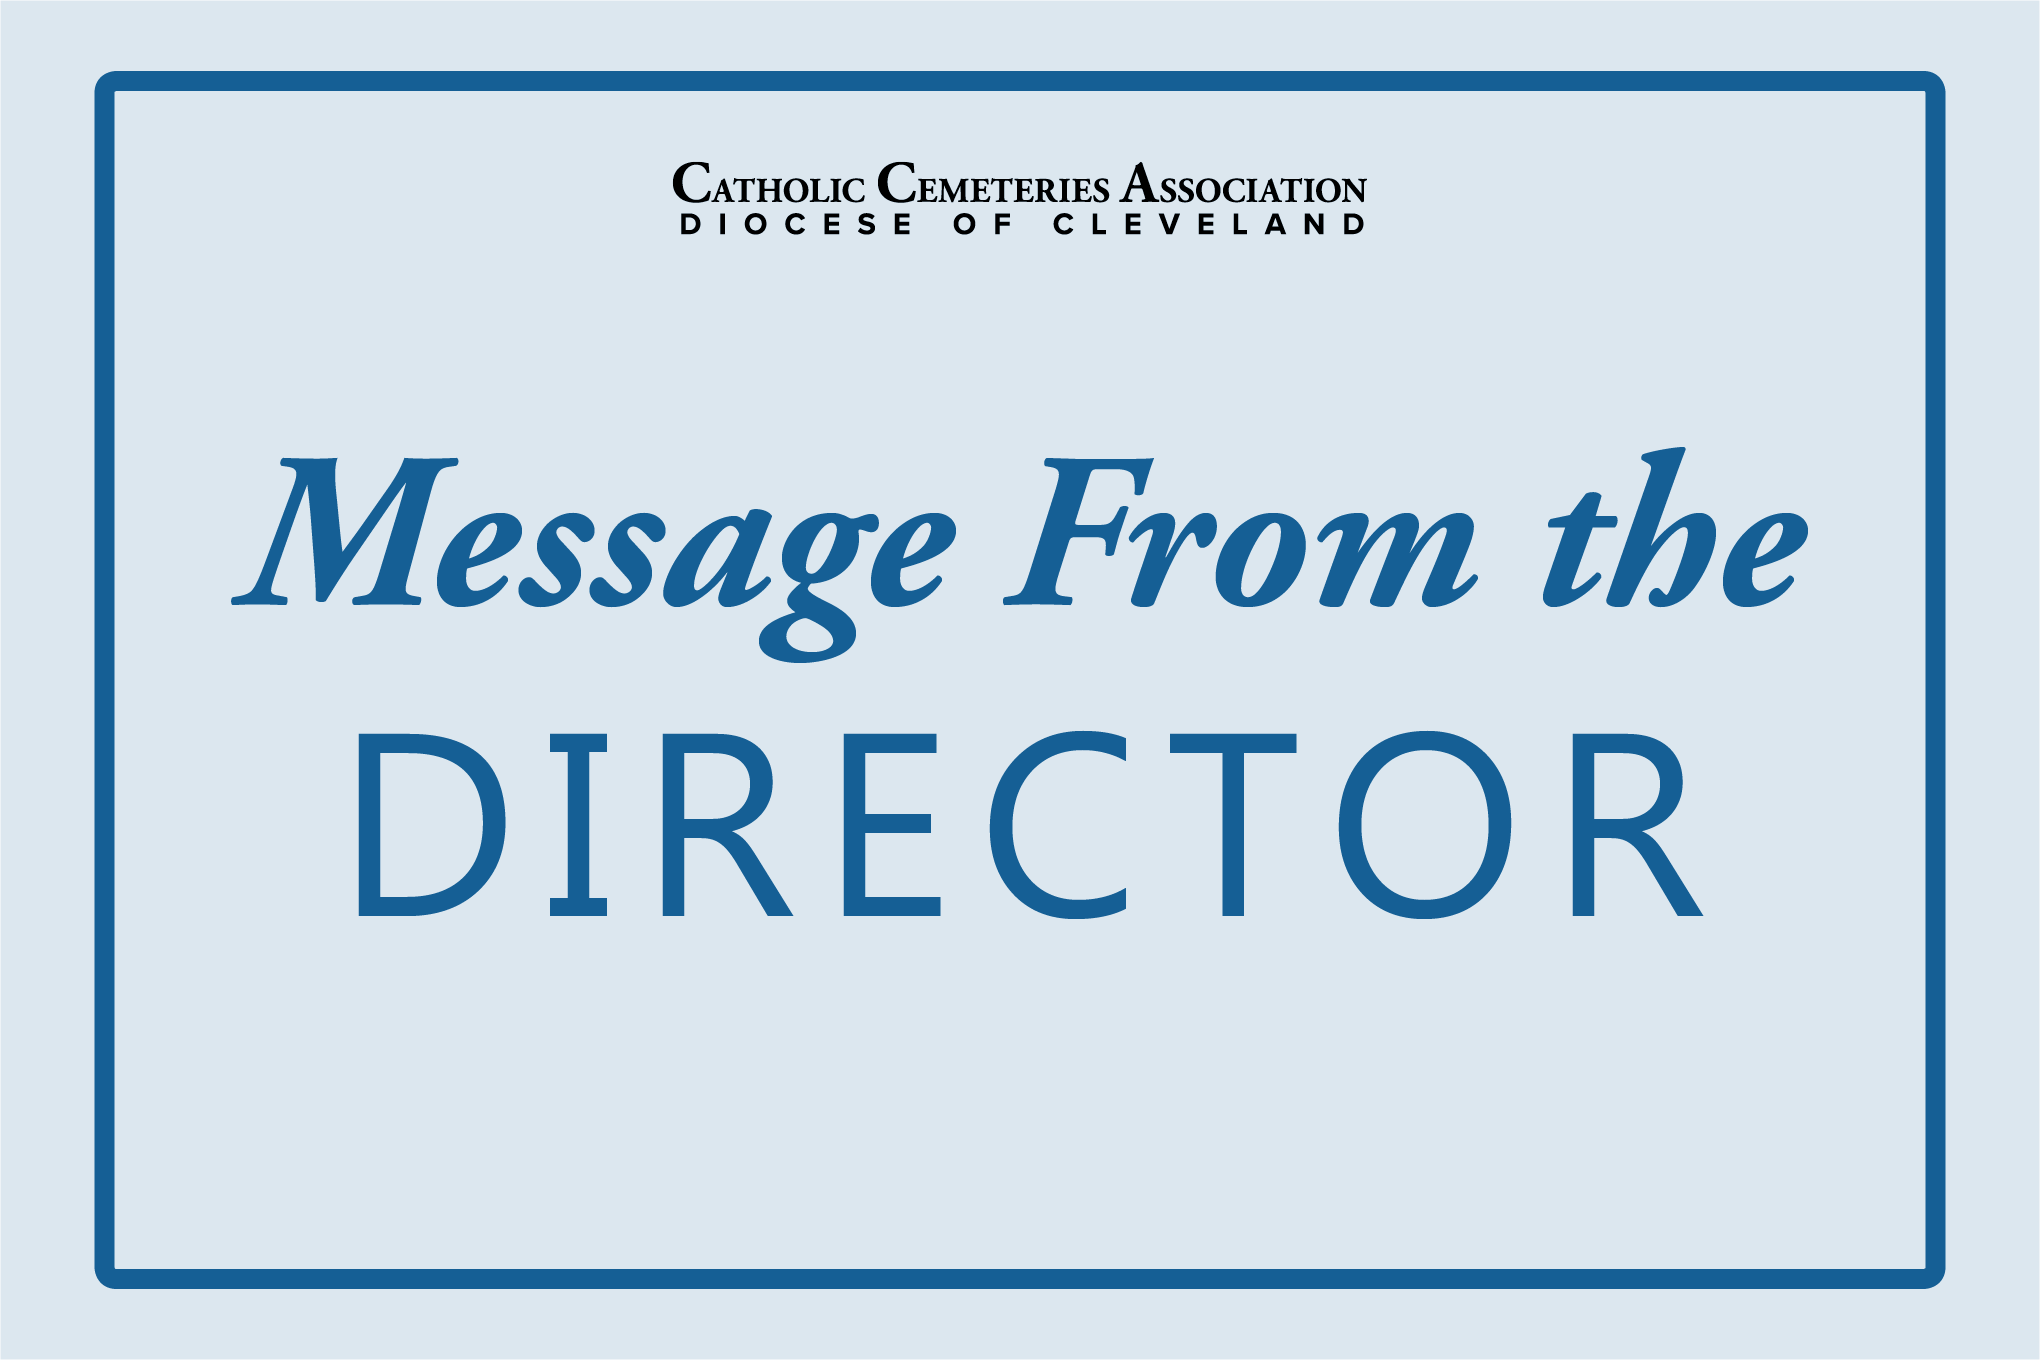 Message from director image header